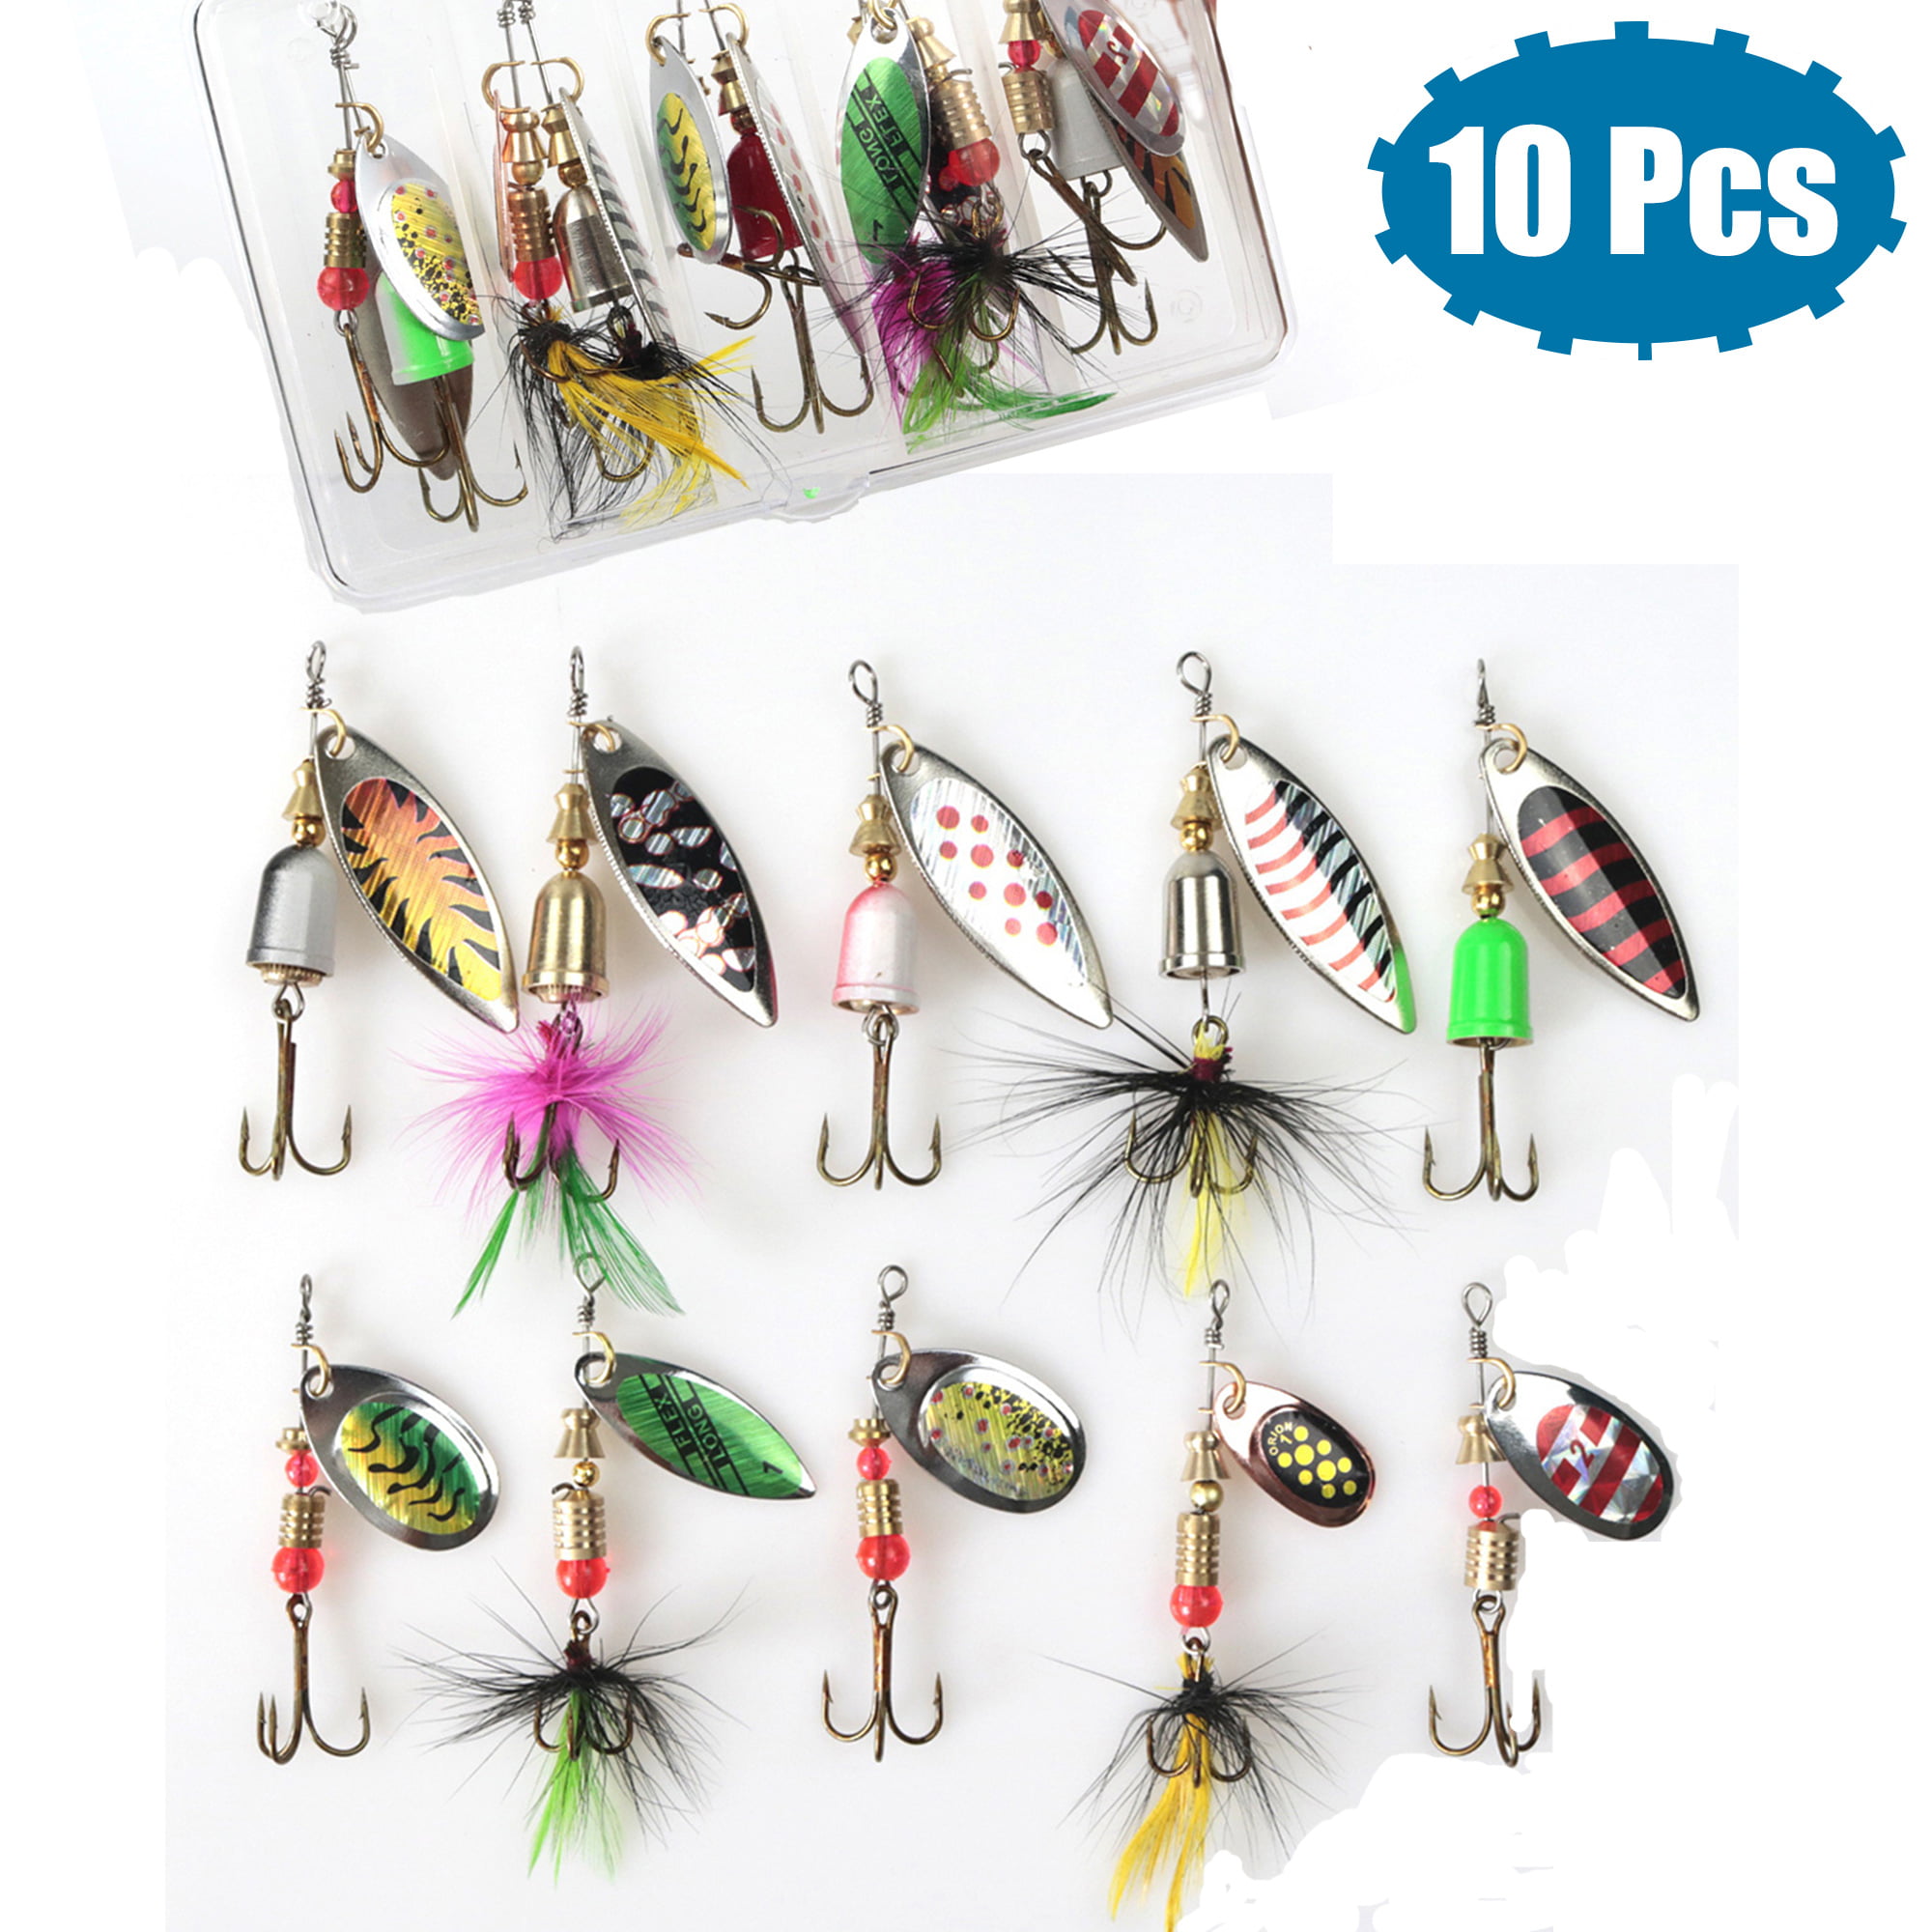 10pcs Metal Spoon Lure Treble Hook Spinnerbait Salmon Trout Bass Fishing Lures 